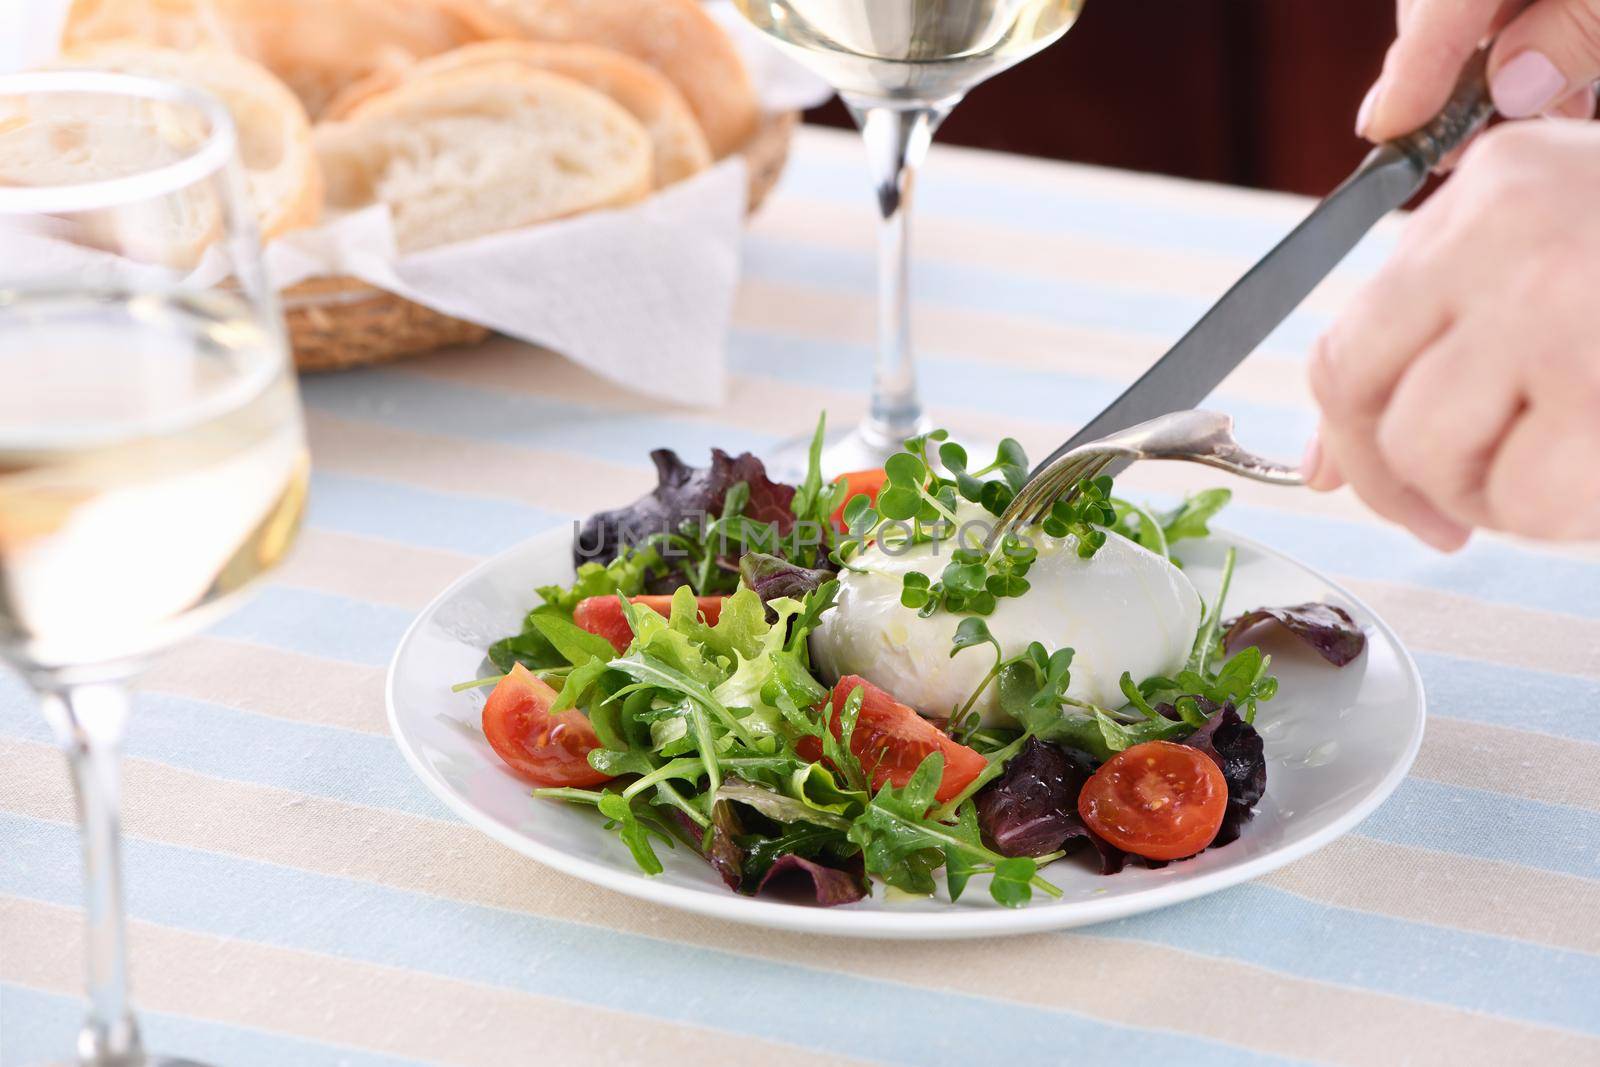 A healthy salad made from a lettuce leaves vegetables mix greens portion, arugula, tomatoes, radish sprouts and mozzarella cheese, olive oil and fresh bread, and a glass of white wine

